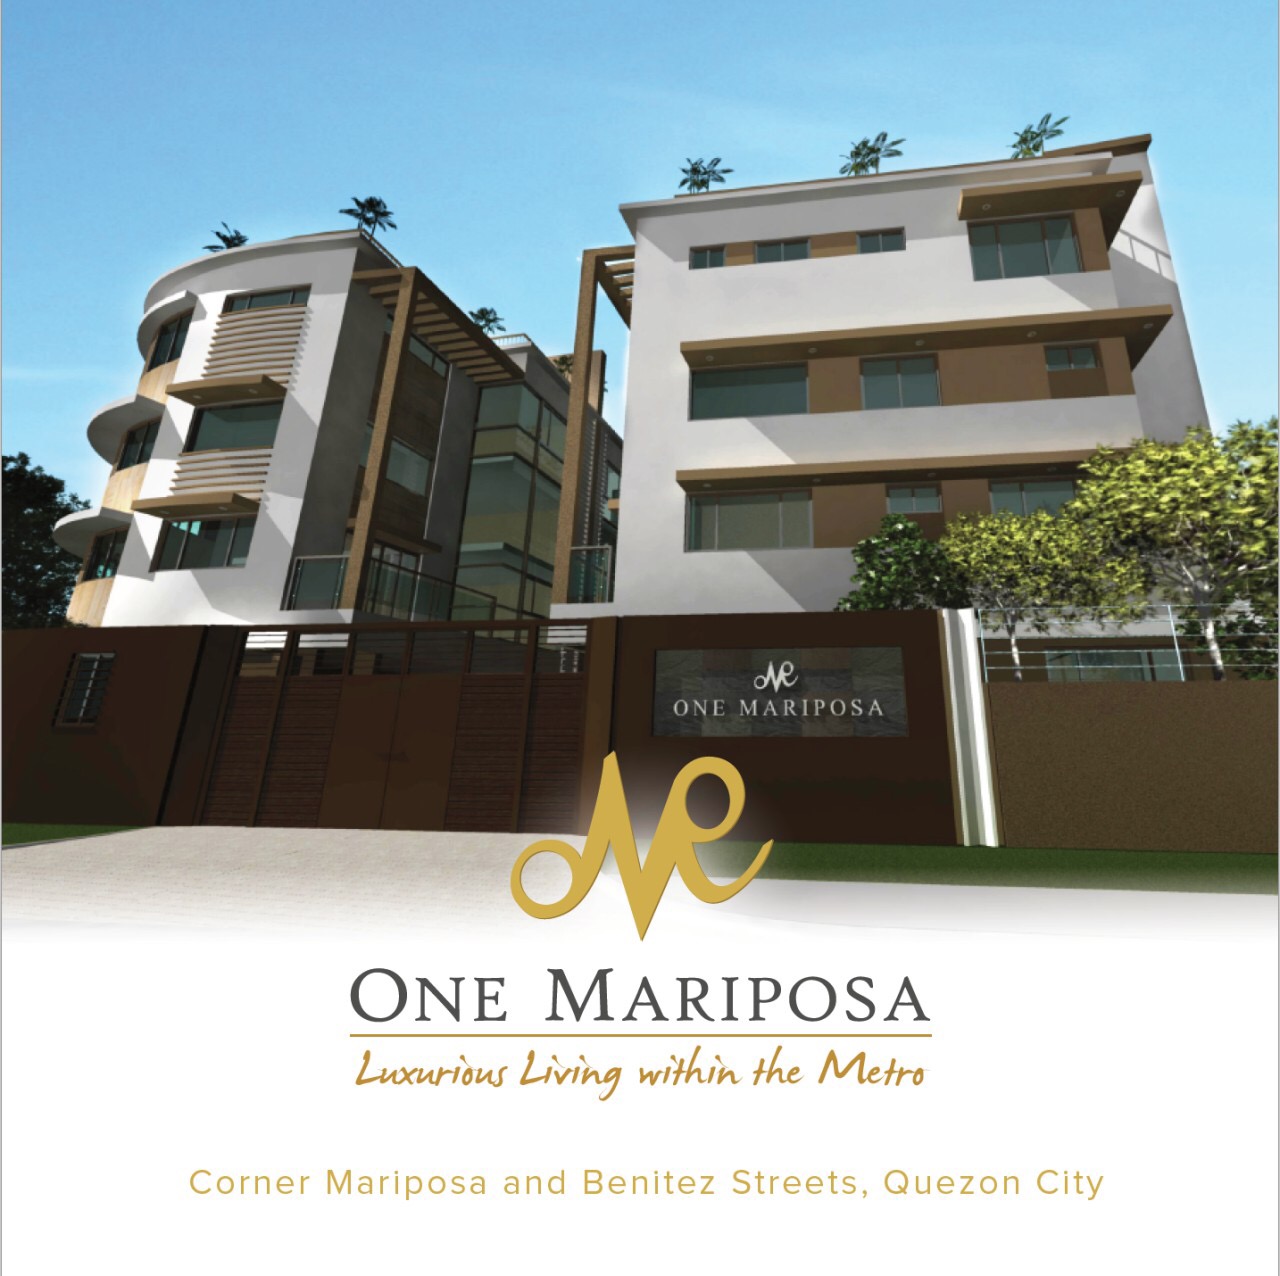 Luxurious Living in the Metro: One Mariposa